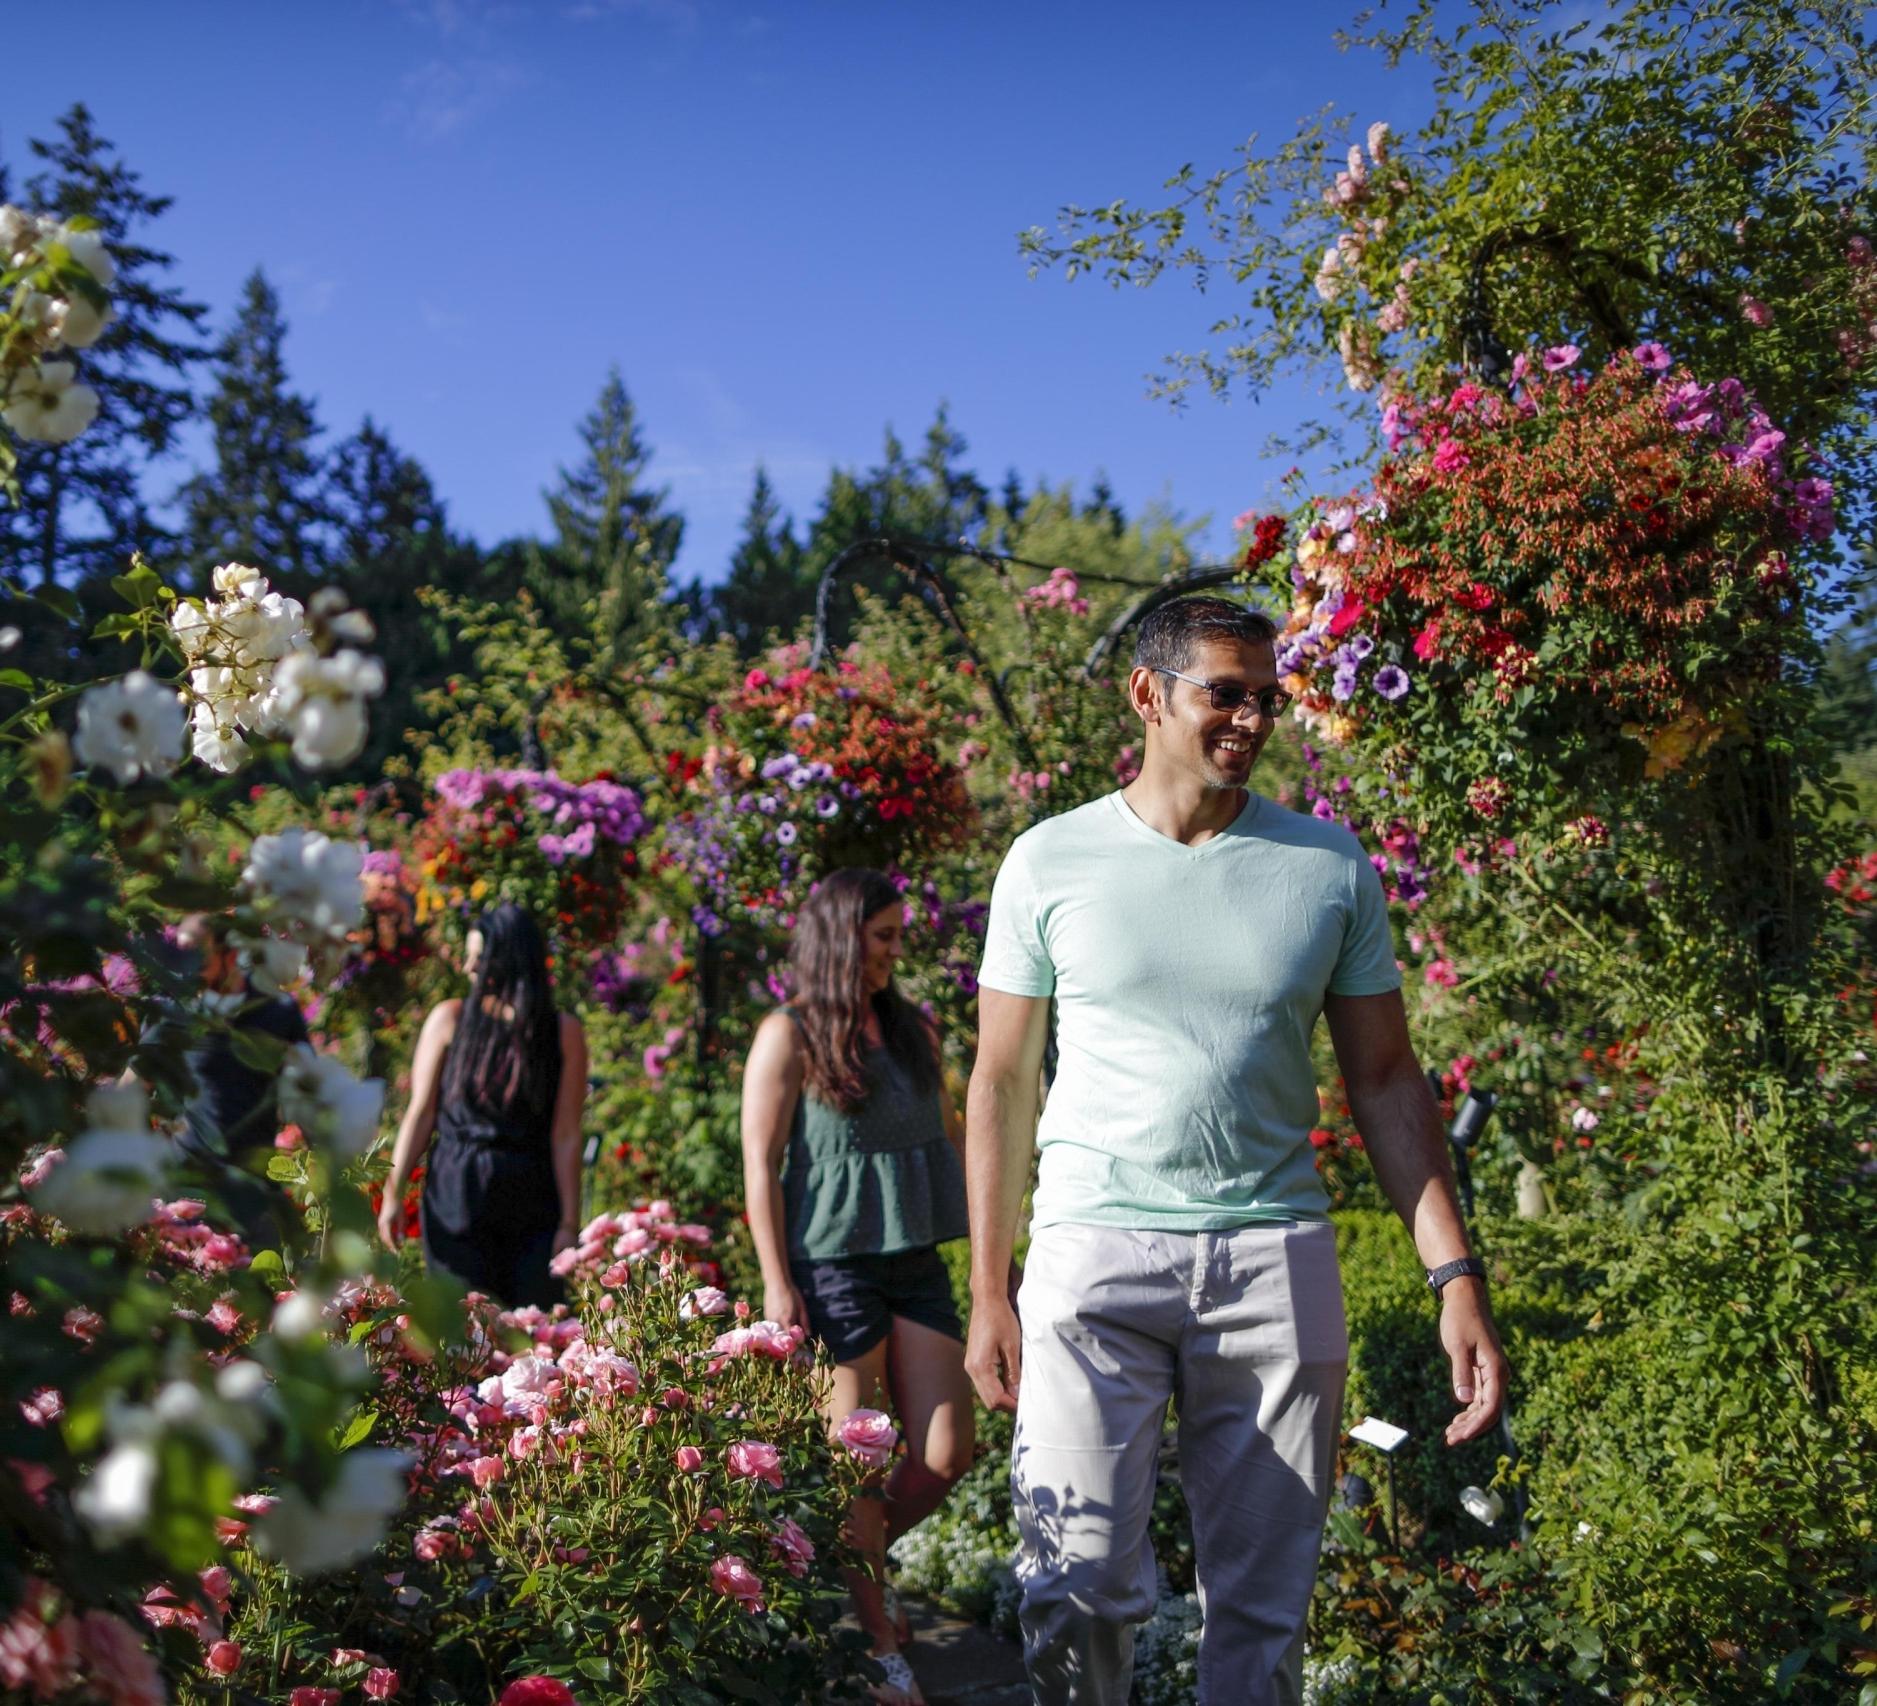 A group of professionals visits The Butchart Gardens